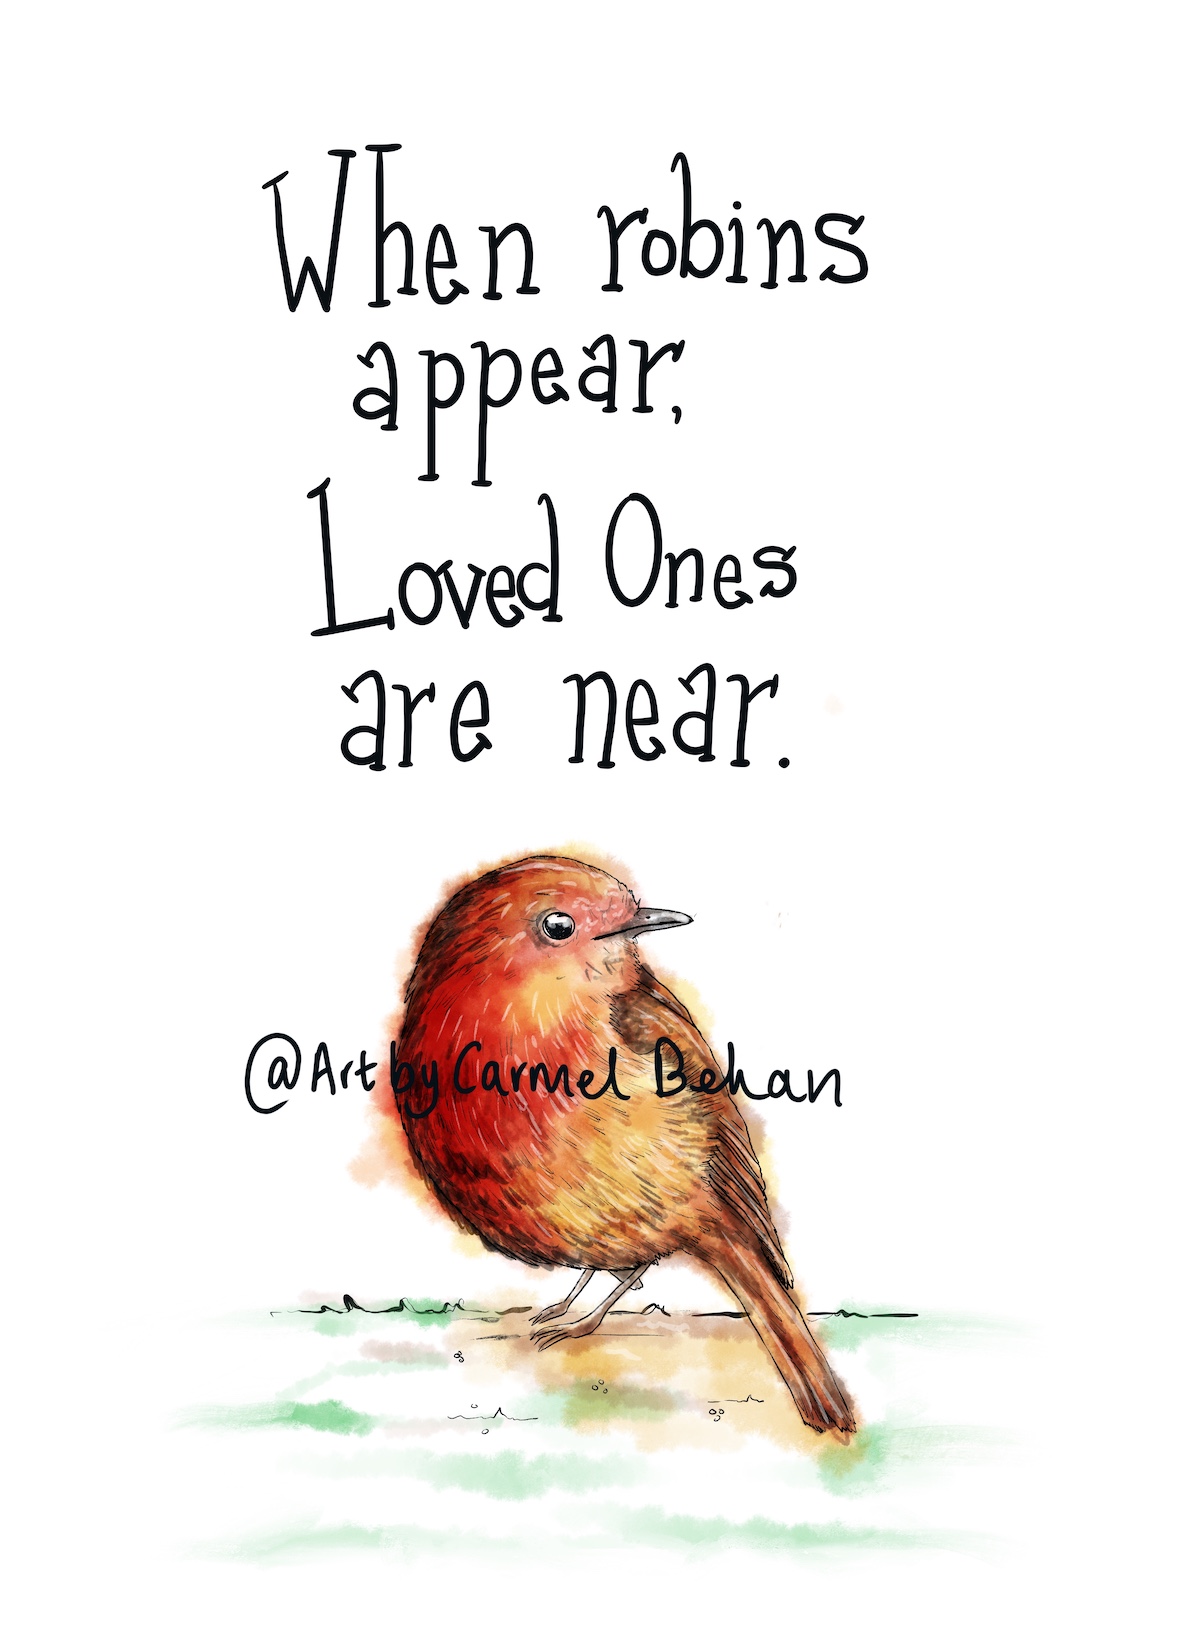 Robins appear when loved ones are near A6 art print lost loved ones loving quote